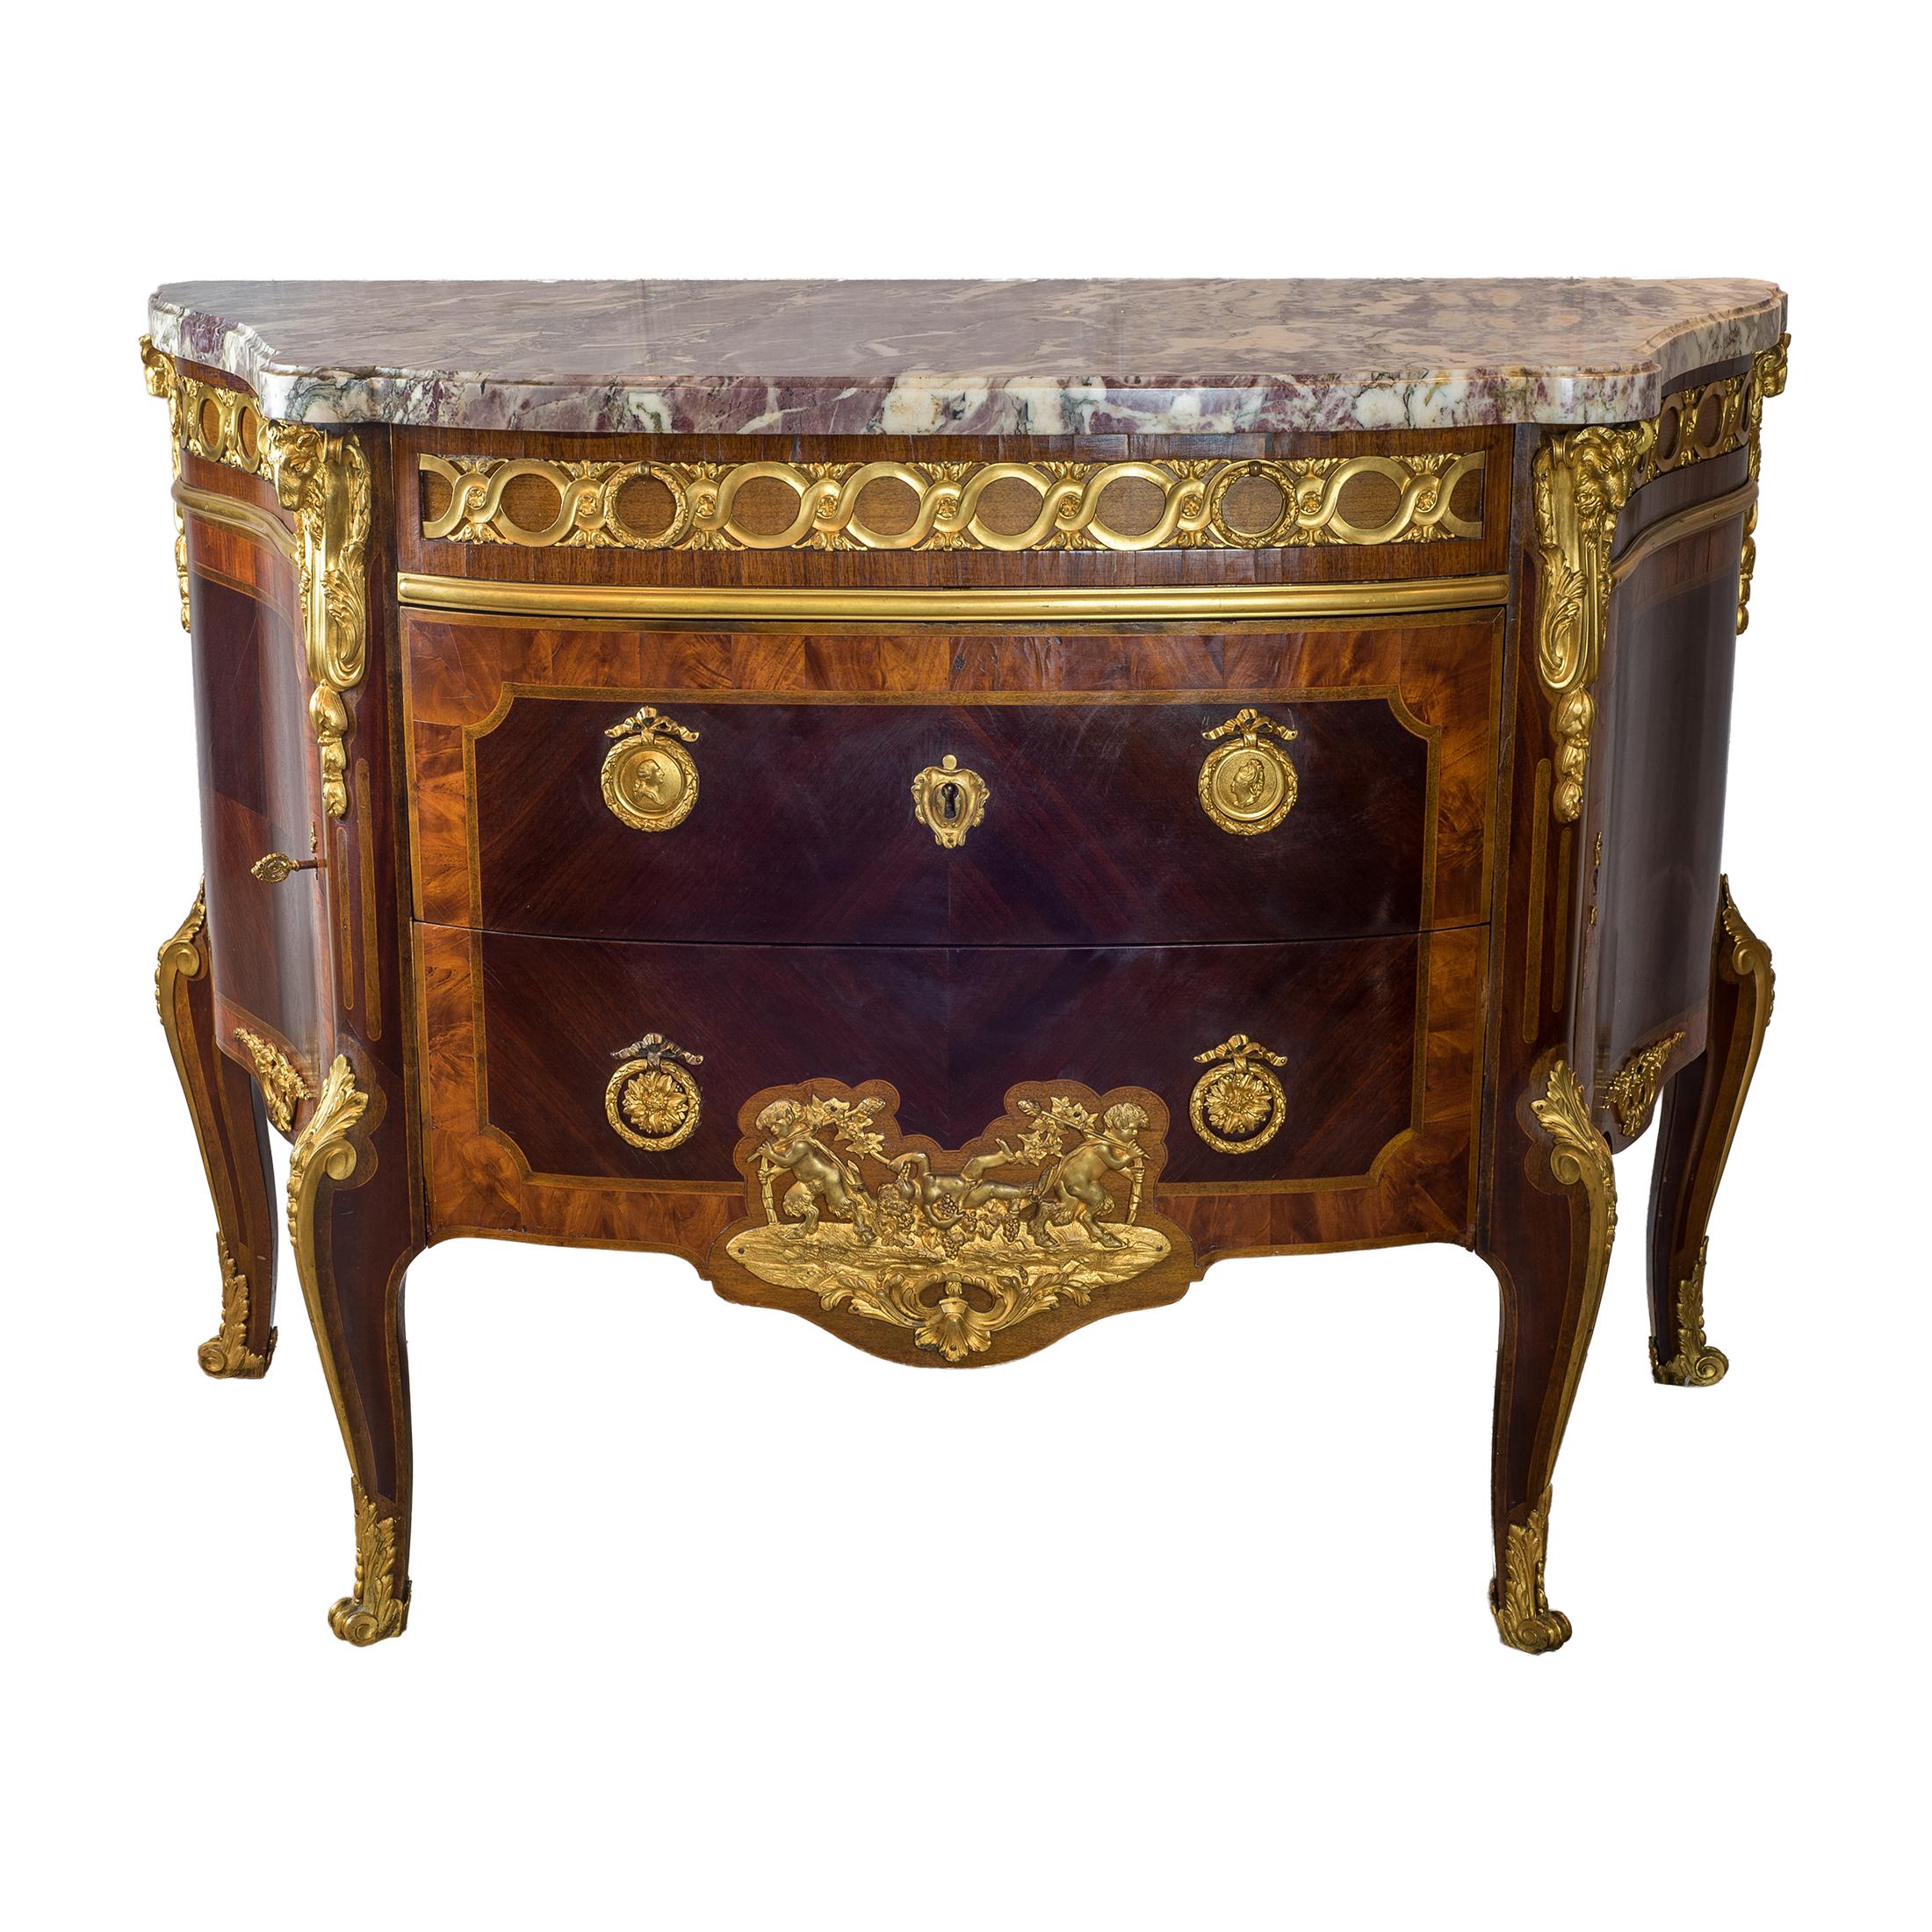 French Pair of Gilt Bronze-Mounted Tulipwood and Amaranth Marble-Top Commode For Sale